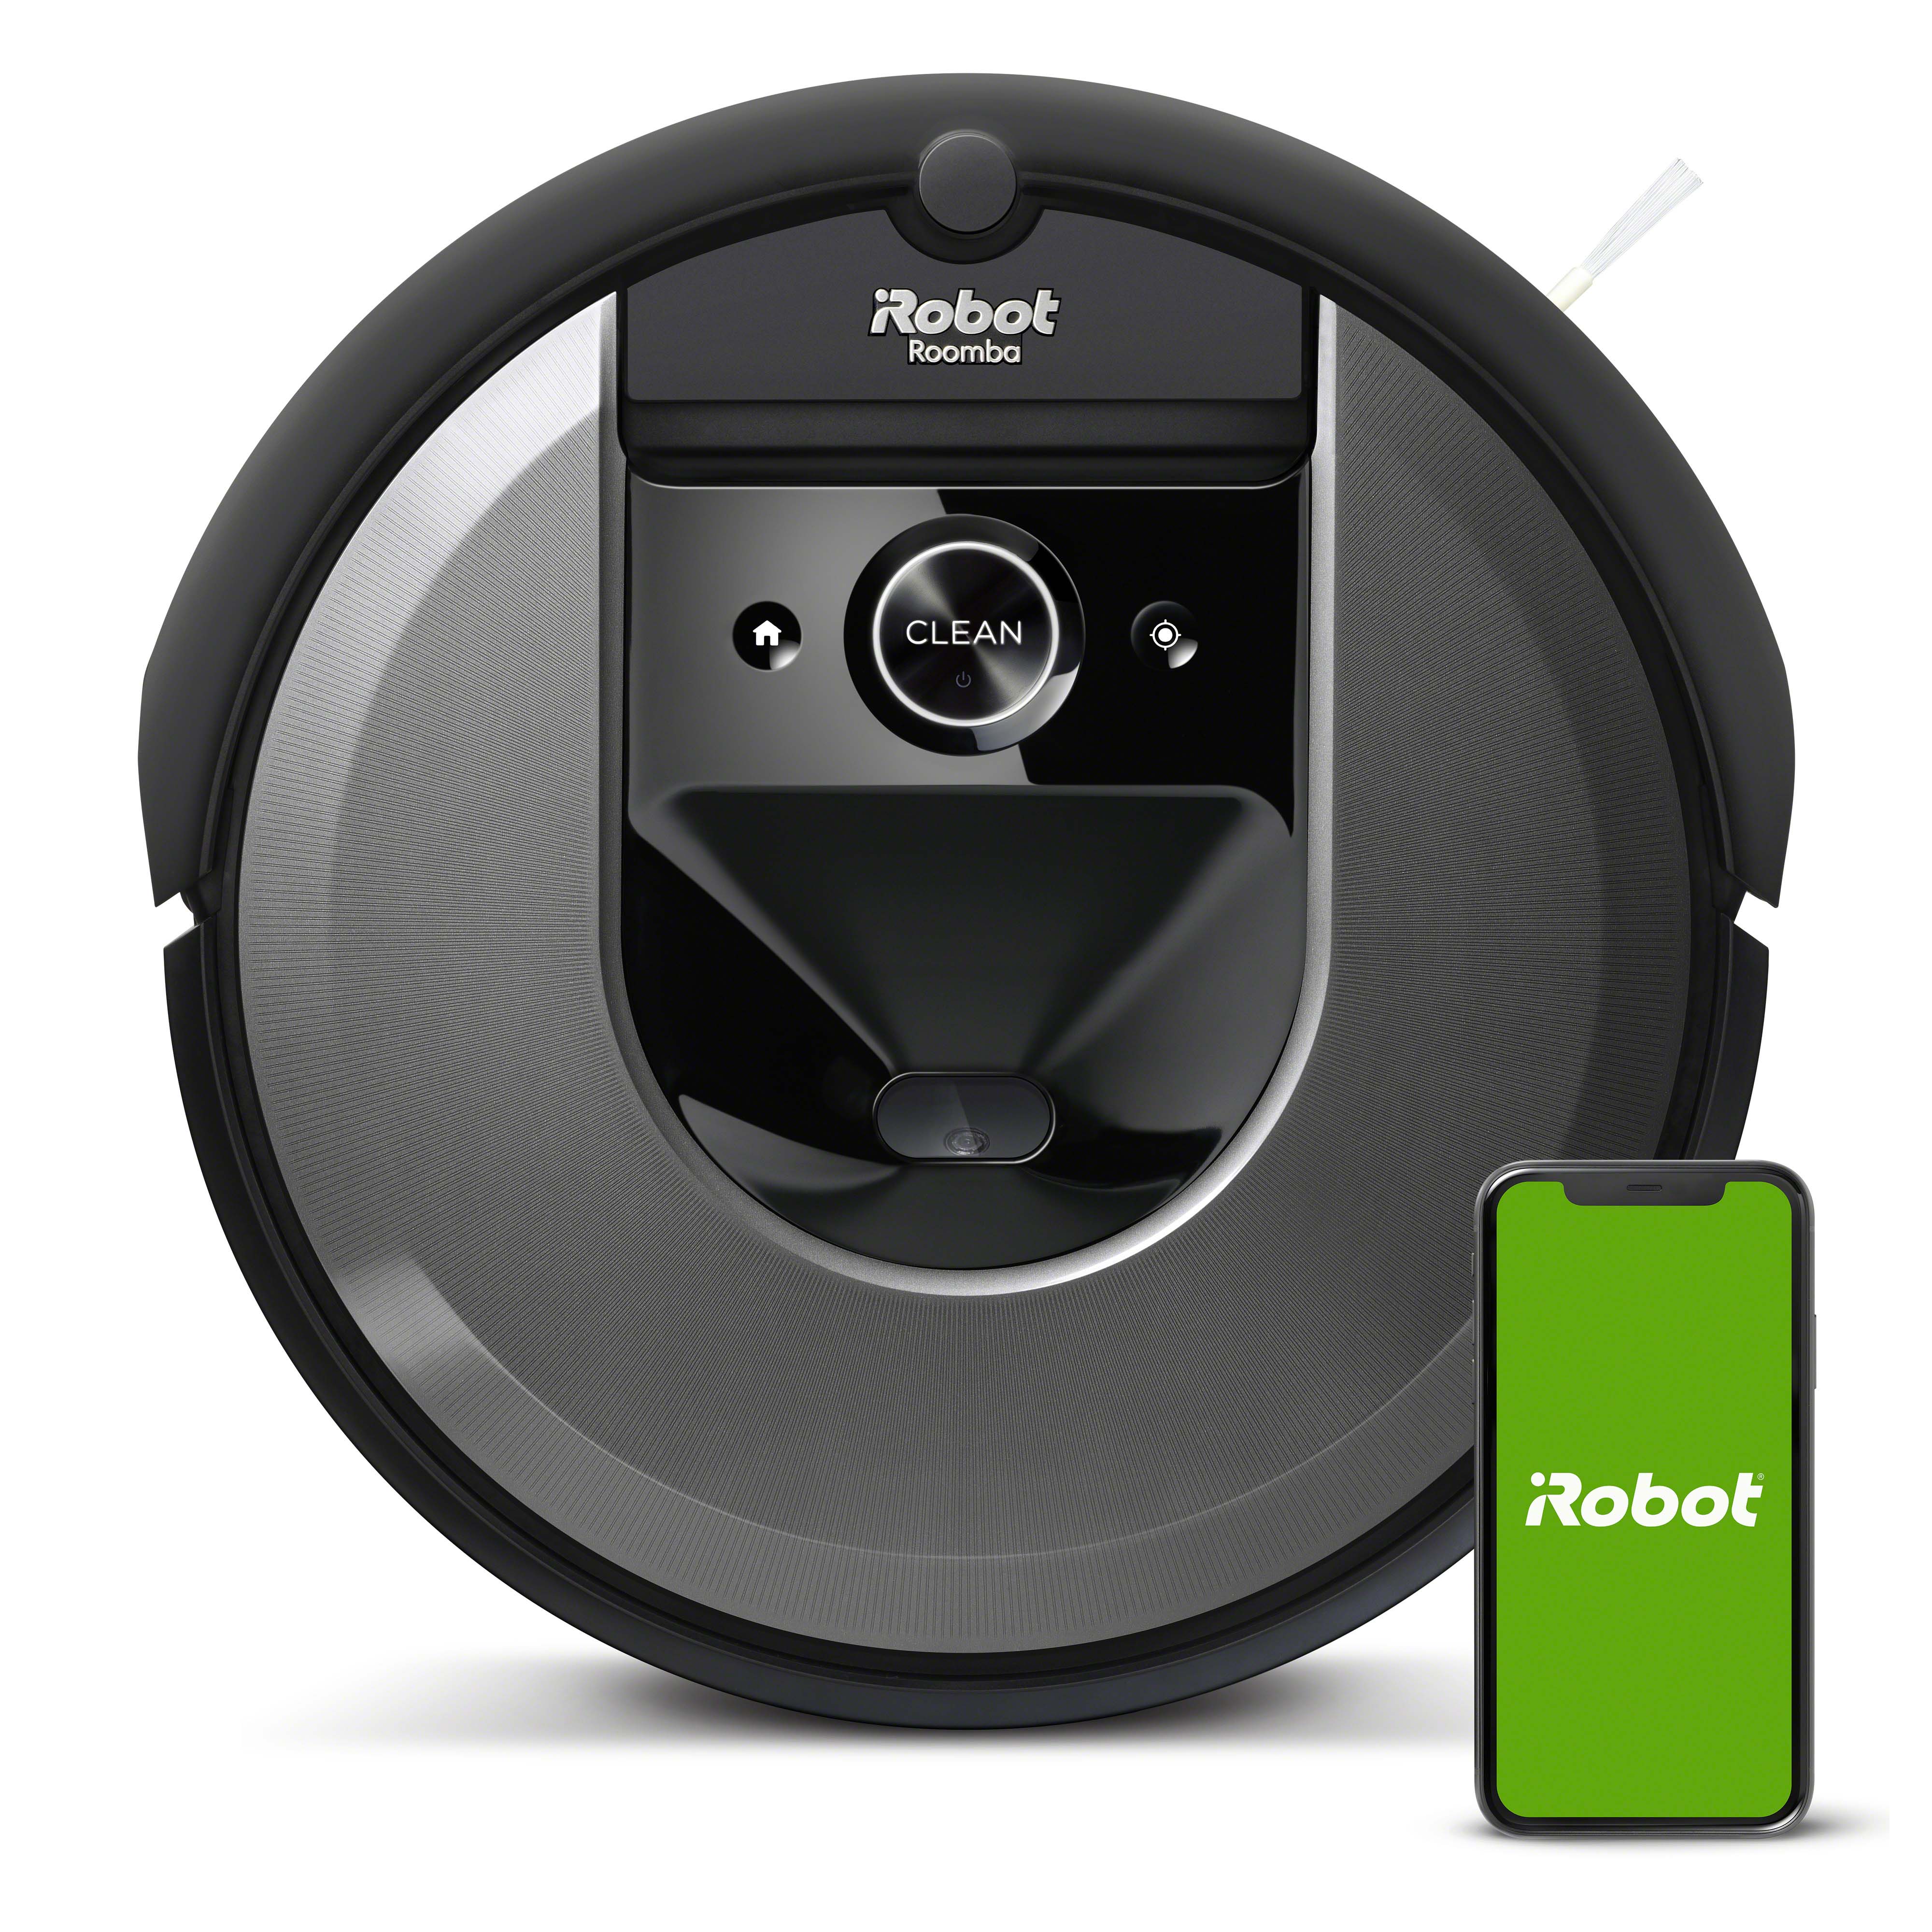 iRobot Roomba i7 (7150) Robot Vacuum- Wi-Fi Connected, Smart Mapping, Works with Google Home, Ideal for Pet Hair, Carpets, Hard Floors - image 1 of 16